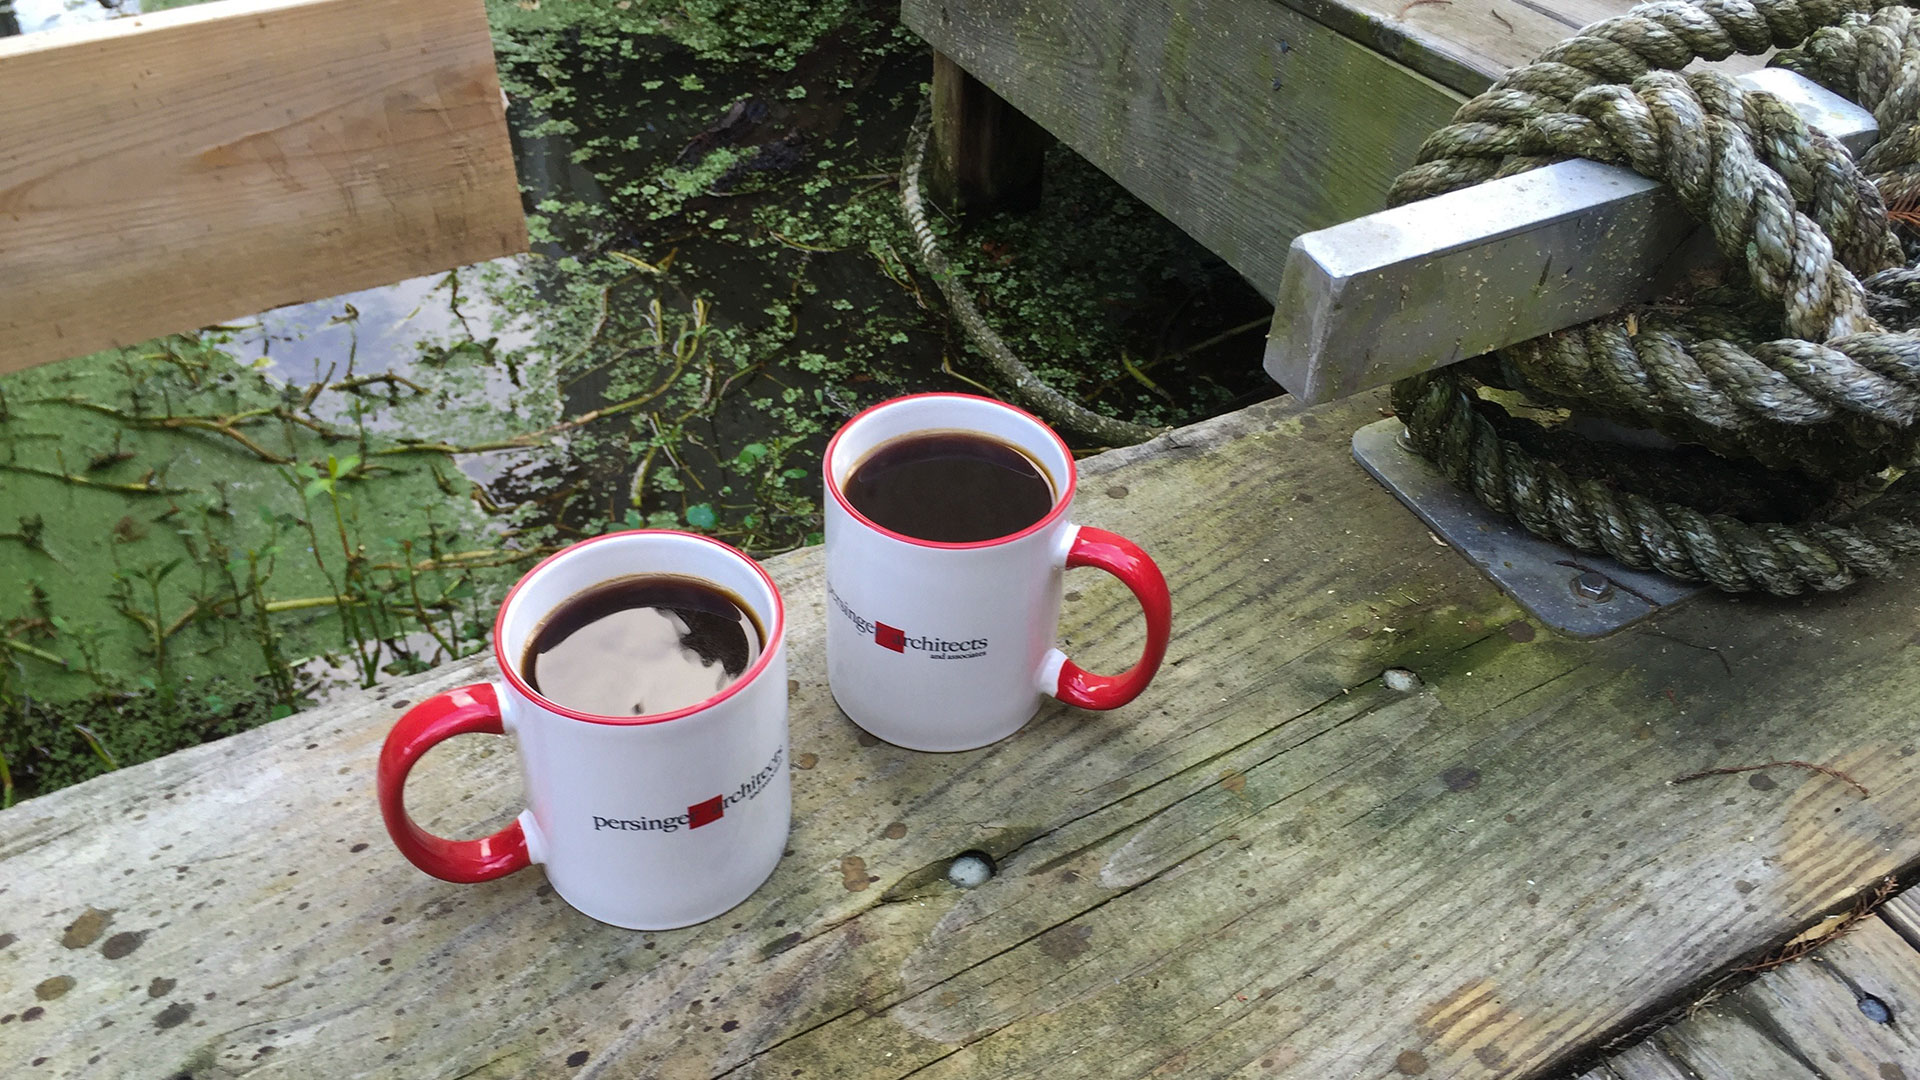 Pair of persinger mugs, filled with coffee, on a wooden dock with water below